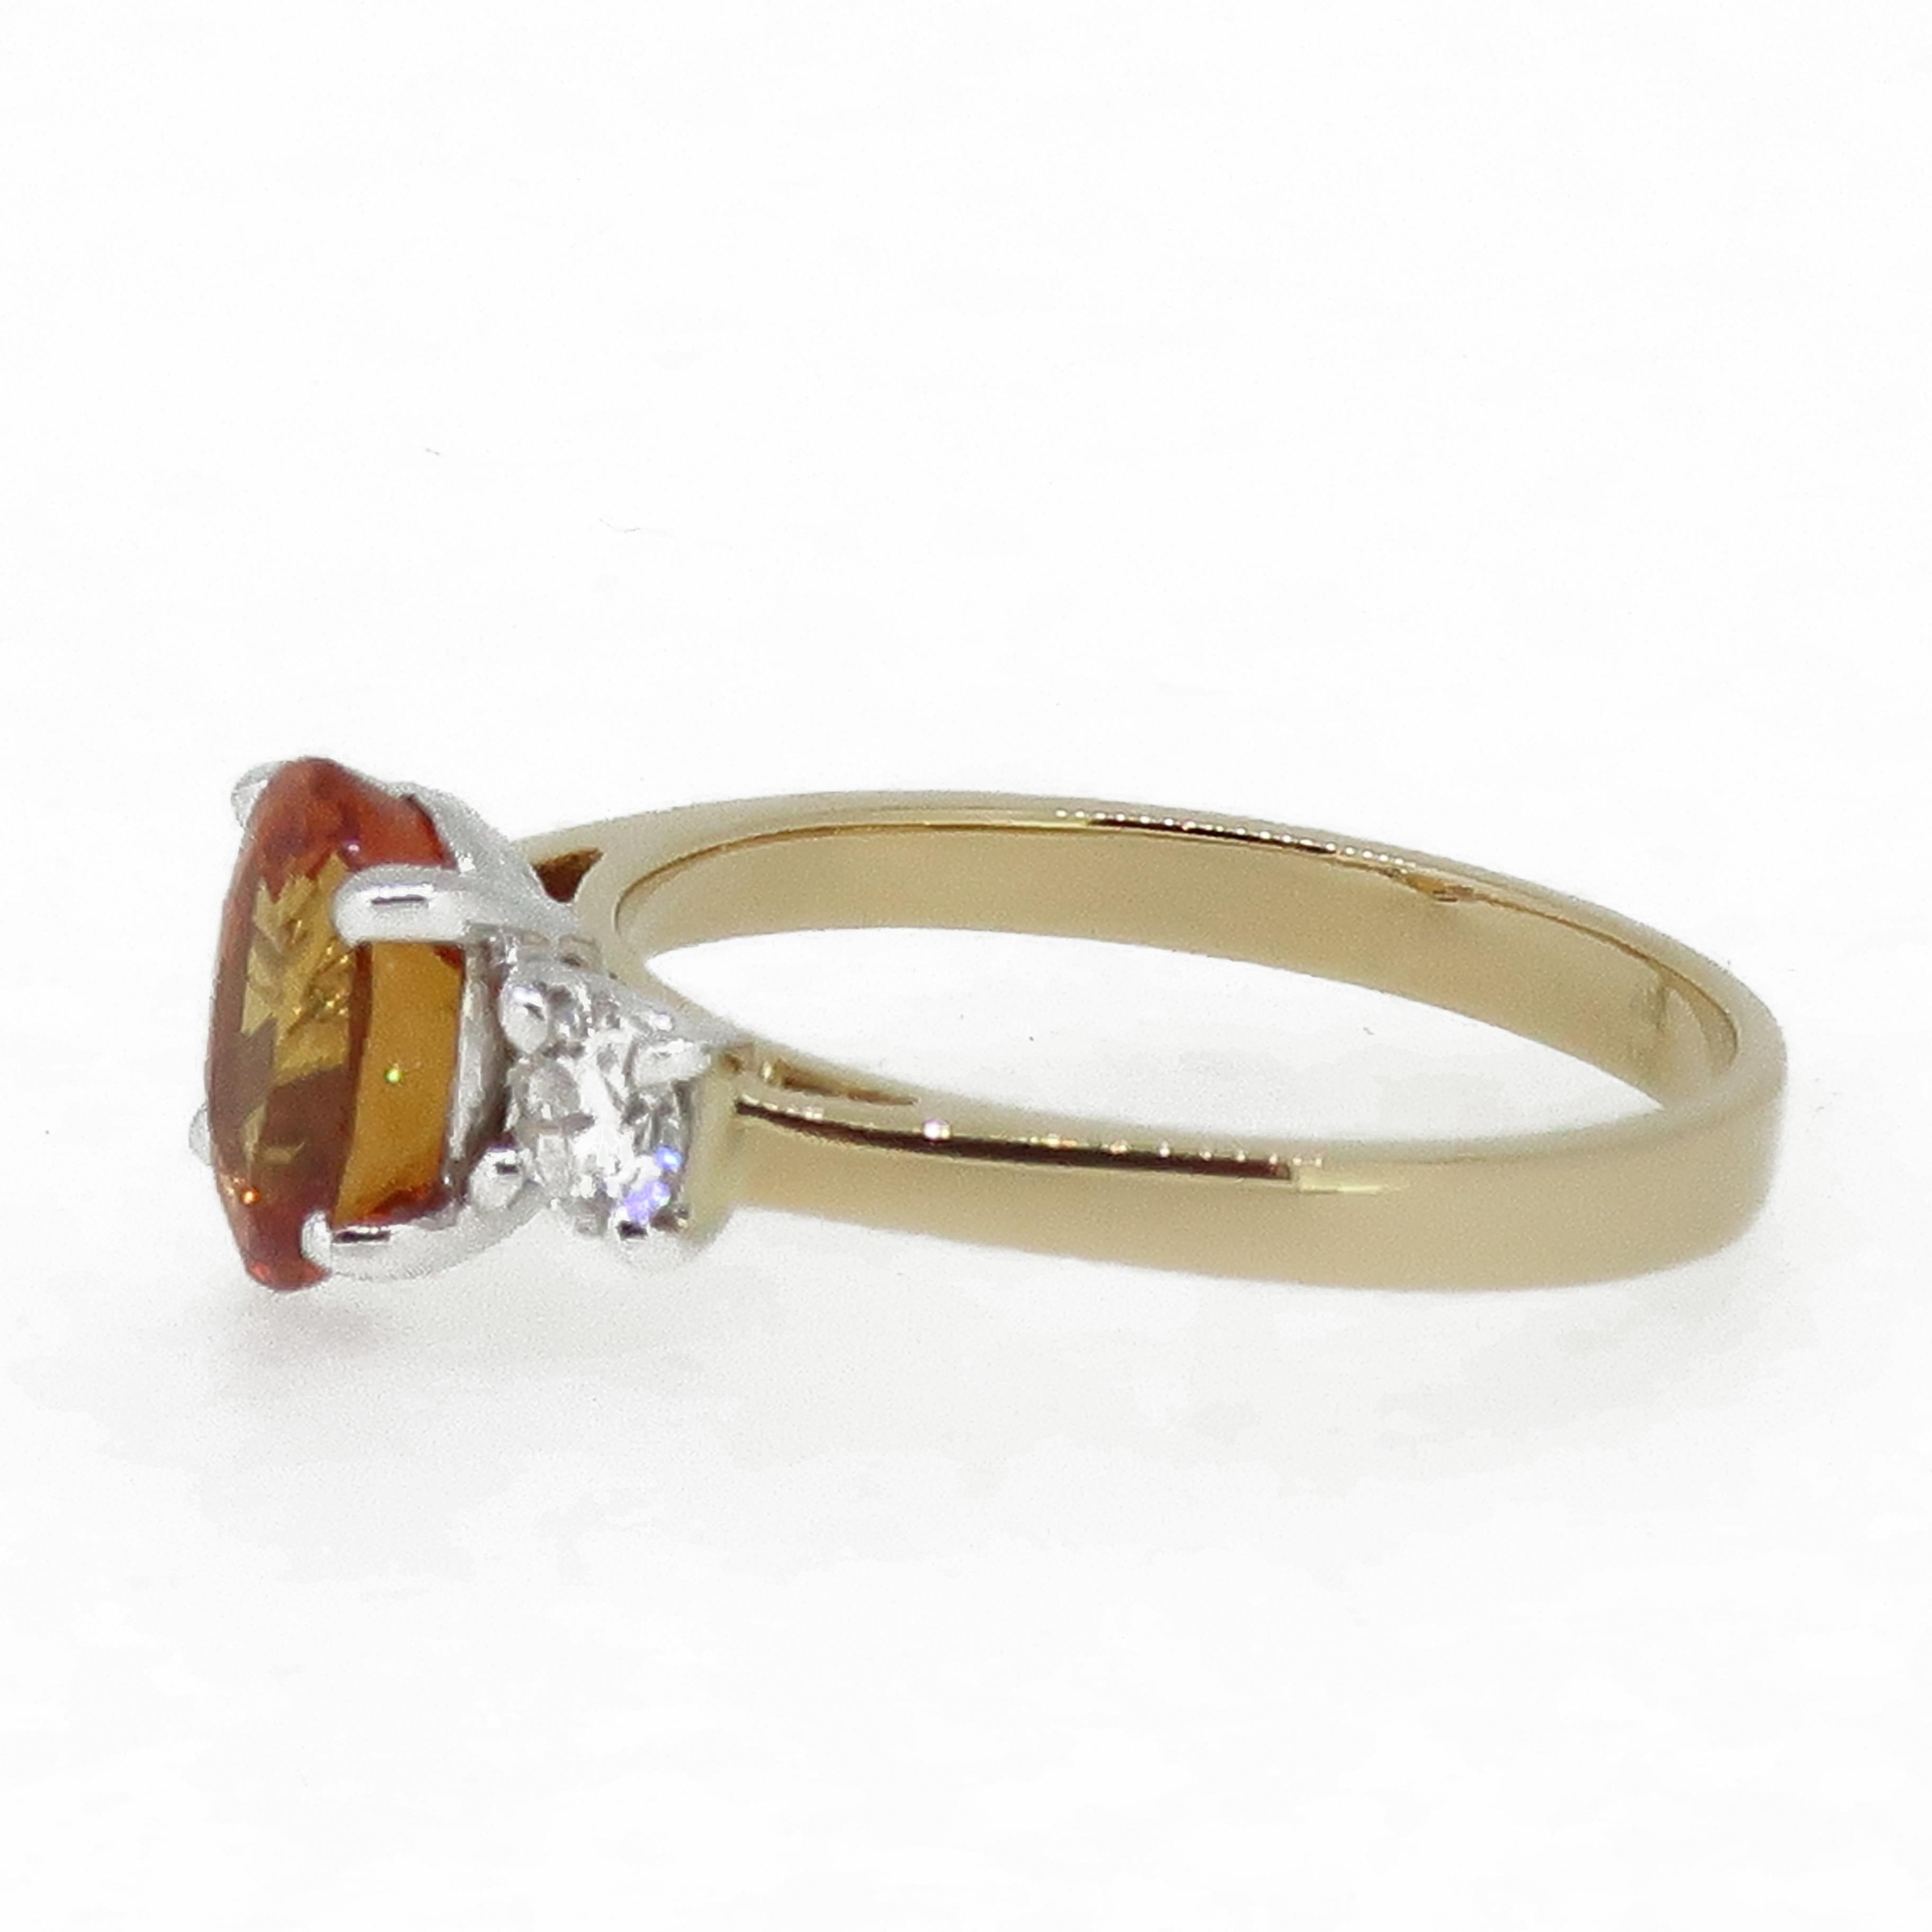 Oval Orange Sapphire and Diamond Three-Stone Ring 18 Karat Yellow and White Gold

A vibrant oval orange sapphire & diamond 3 stone ring. Central oval sapphire sits proud above the two diamonds in 18ct white gold four claws, flanked by a round